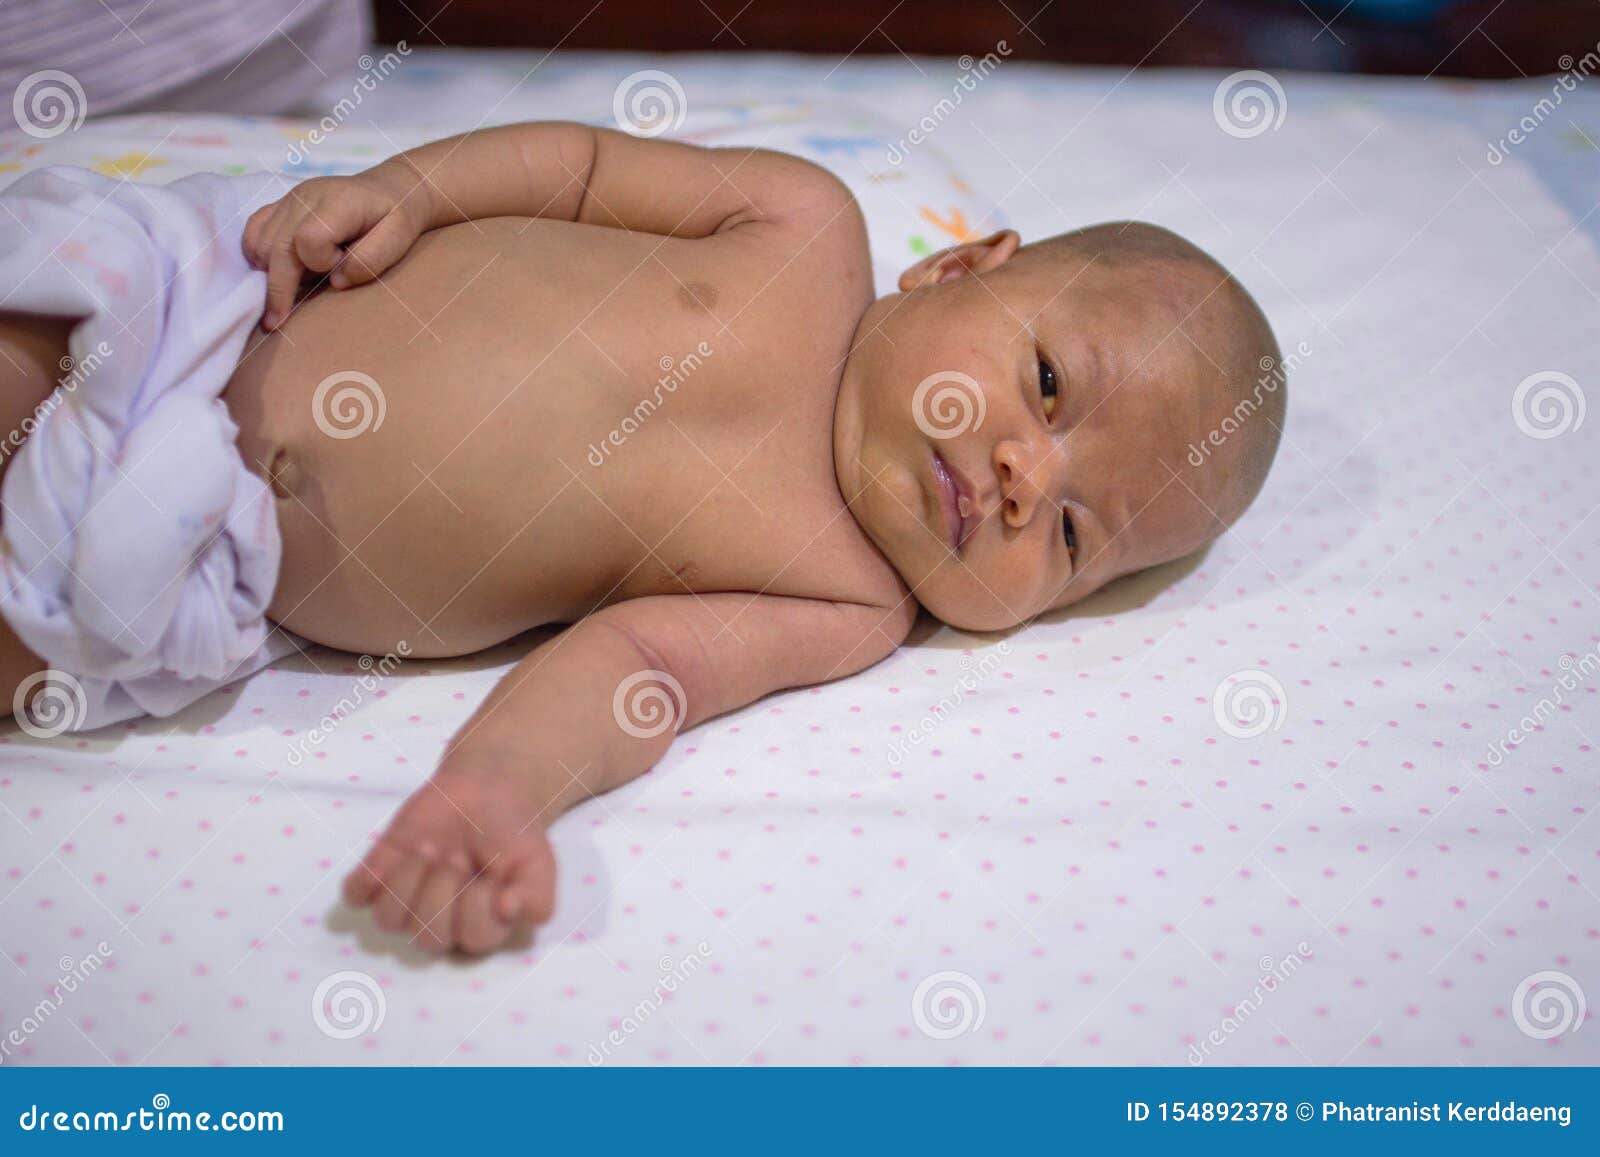 Newborn Baby is Laying on the White Bed. New Born is No Hair. Child is 1  Months. Asian Infant is Wearing White Fabric Diaper Stock Photo - Image of  family, happy: 154892378